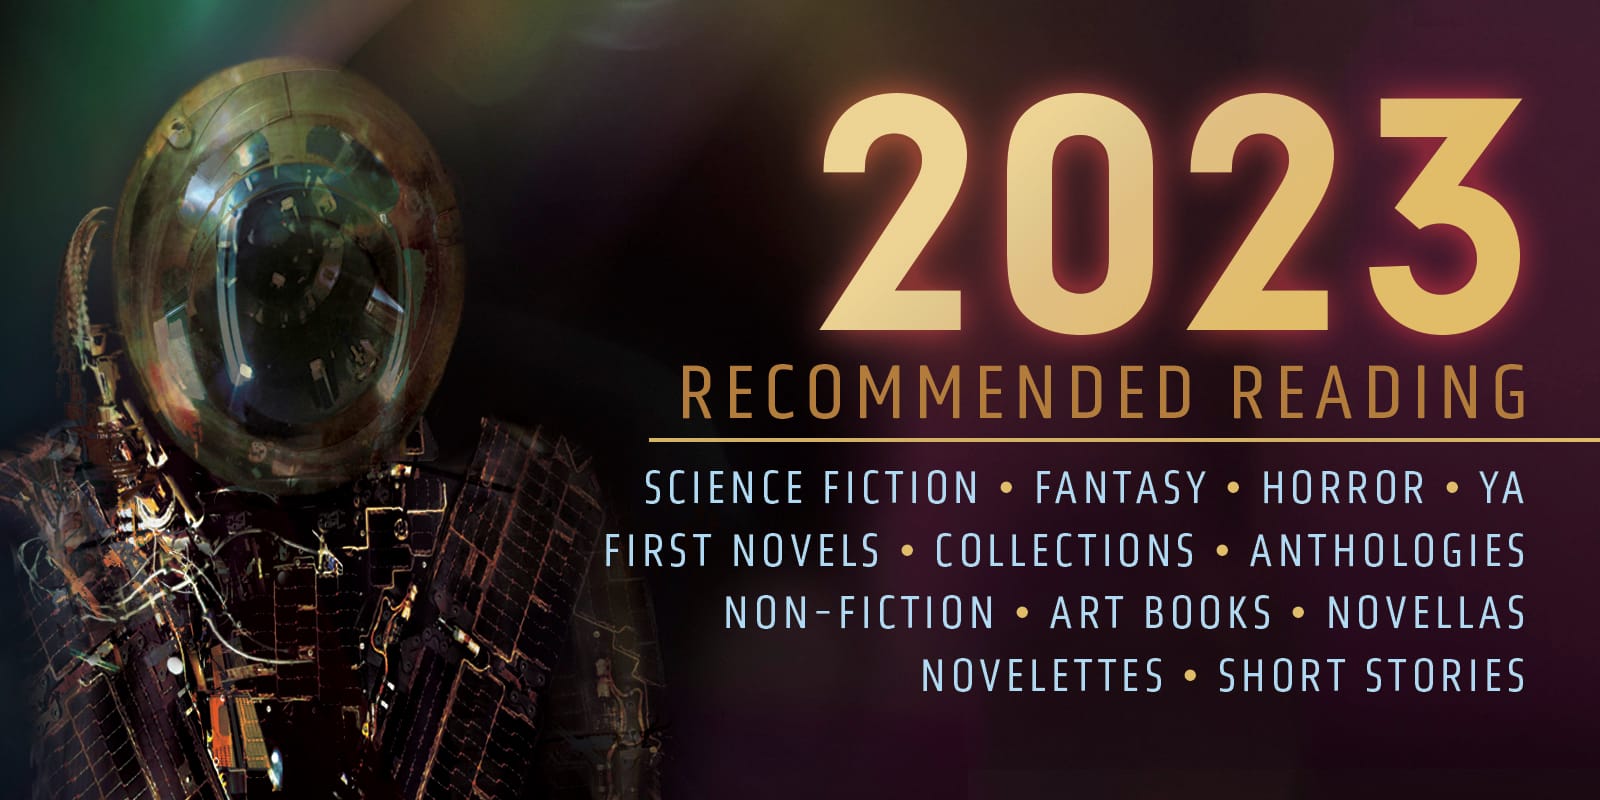 Banner for the 2023 Locus Recommended Reading list featuring a cyborg astronaut. Text reads: 2023  RECOMMENDED READING SCIENCE FICTION • FANTASY • HORROR • YA FIRST NOVELS • COLLECTIONS • ANTHOLOGIES NON- FICTION • ART BOOKS • NOVELLAS  NOVELETTES • SHORT STORIES